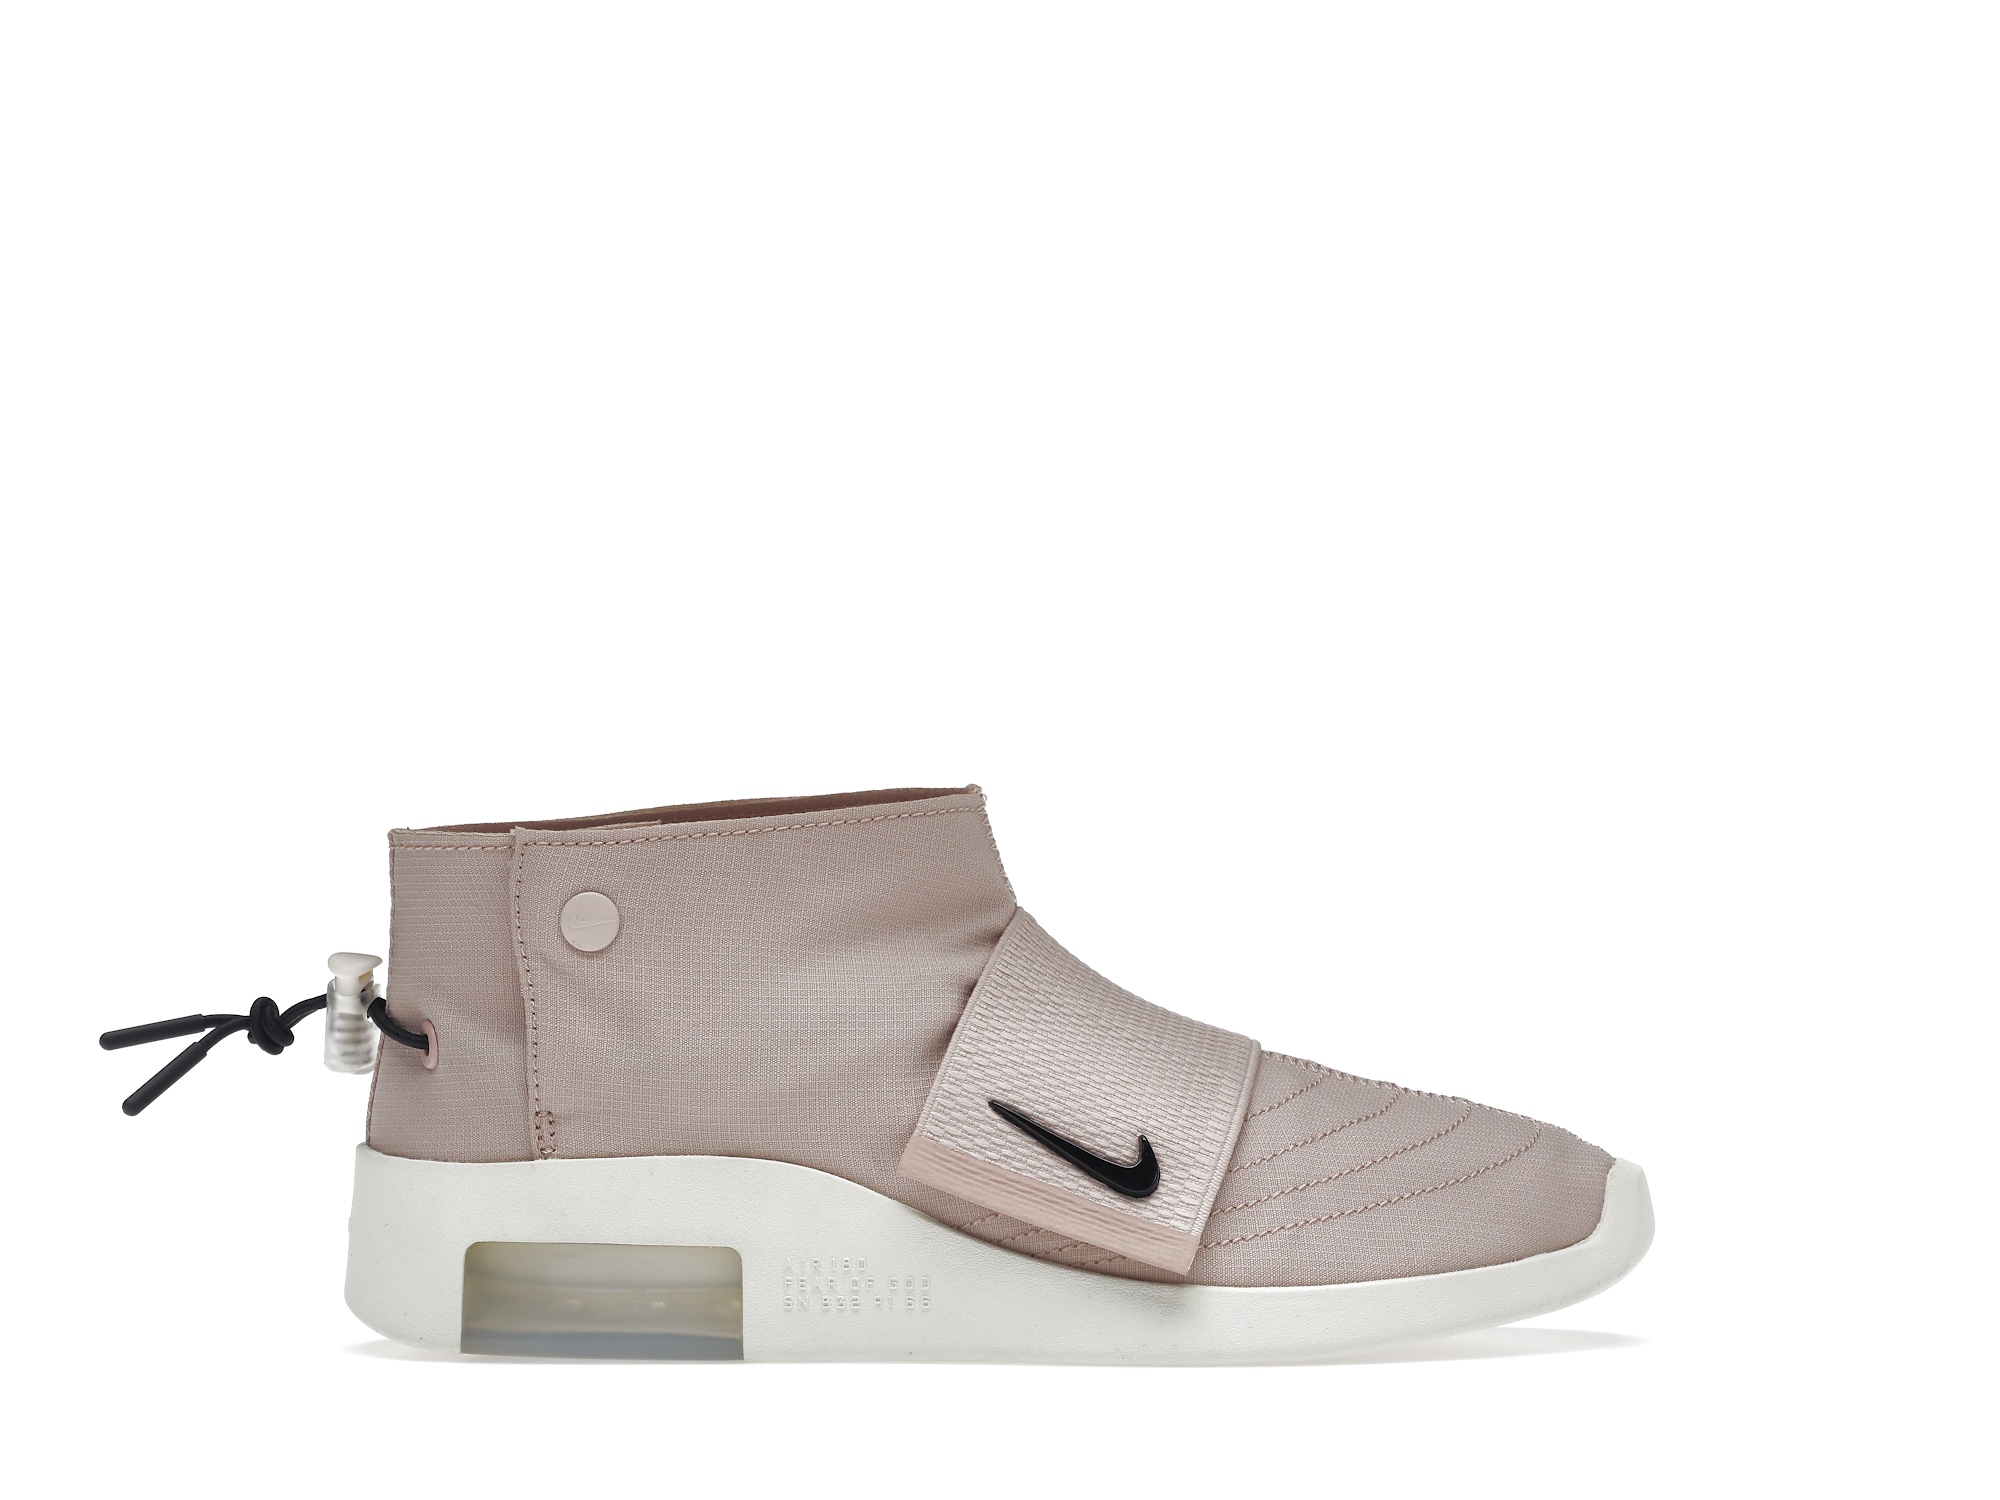 Nike Air Fear Of God Moccasin Particle Beige Men's - AT8086-200 - US